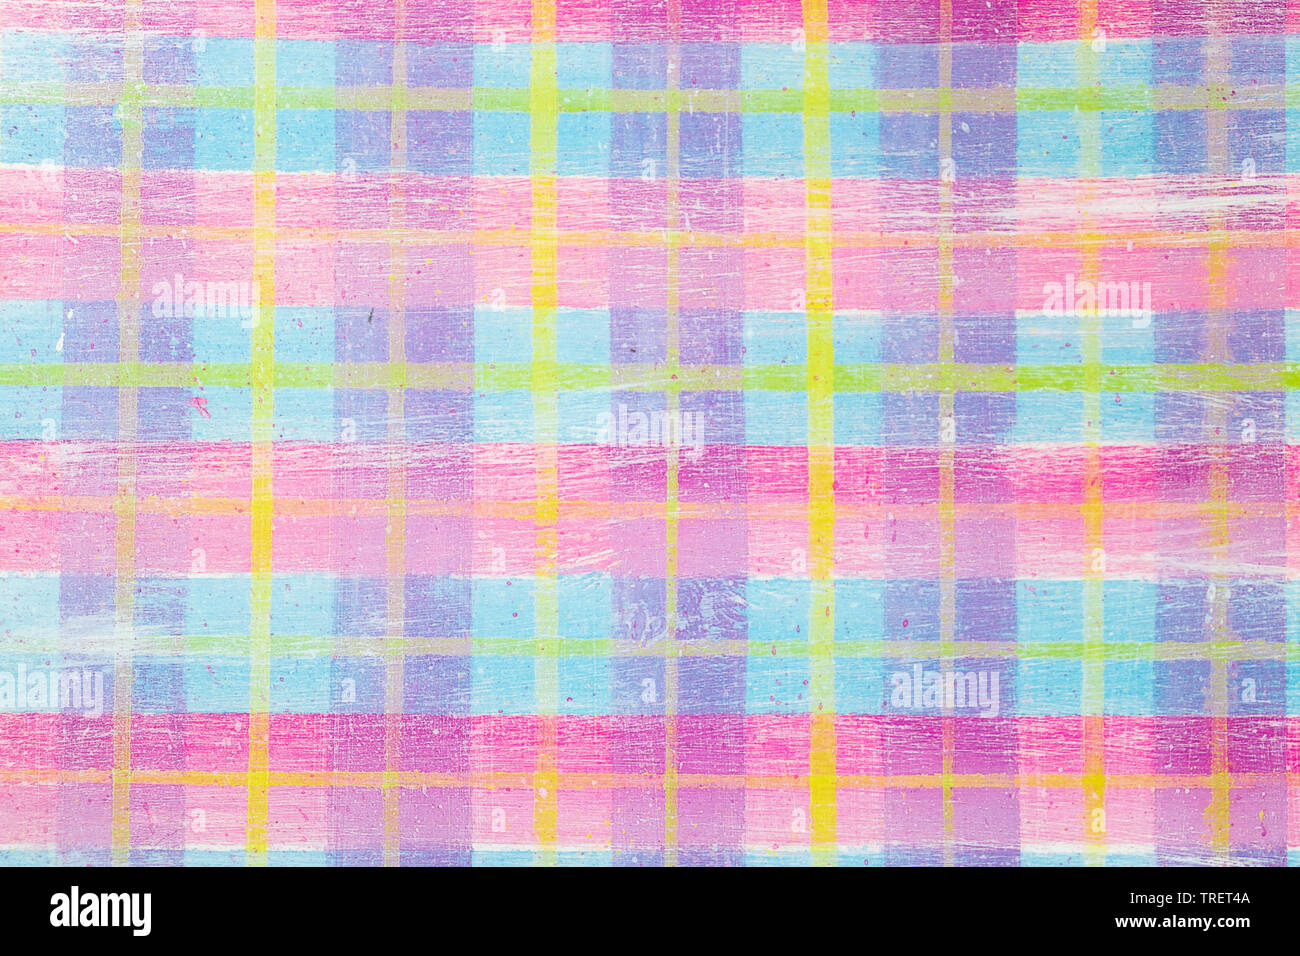 Brightly colored graphic resource, childish plaid pattern Stock Photo